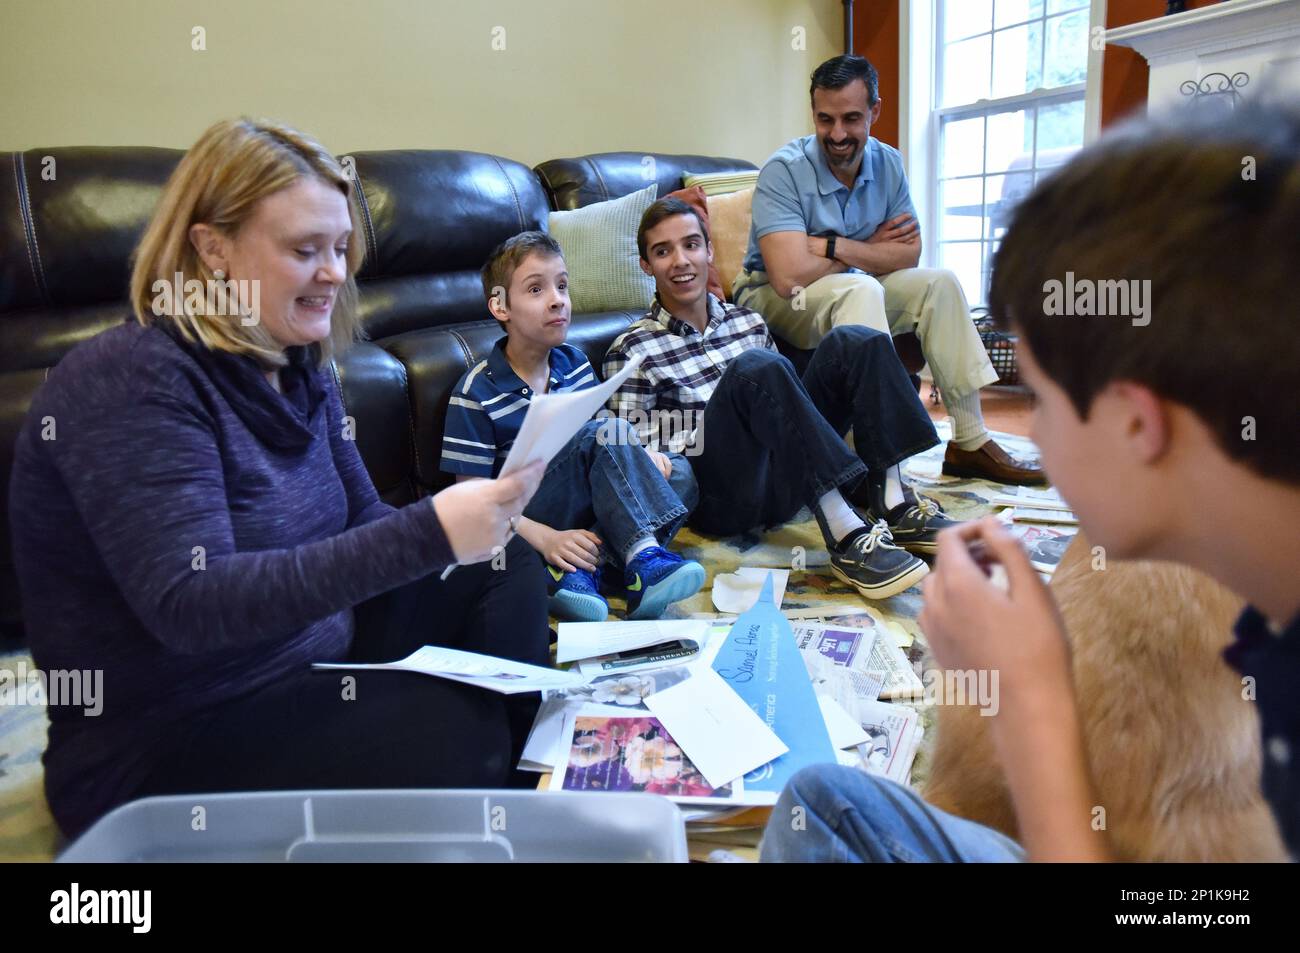 Julie Armas (left) reads one of hundreds of letters that the family received when the Hand of Hope photo went viral as (from left) Zachary (10), Samuel (16), Alex Armas and Ethan (12) listen at their home on Tuesday, February 16, 2016 in Villa Rica, Ga. Julie and Alex Armas have three sons and two of them, Samuel (16) and Zachary (10), have spina bifida. Julie had fetal surgery during her pregnancy with Samuel in hopes of repairing the lesion on his back. USA Today covered the controversial surgery and a photographer captured what has since become the famous "Hand of Hope", which captured Samu Stock Photo